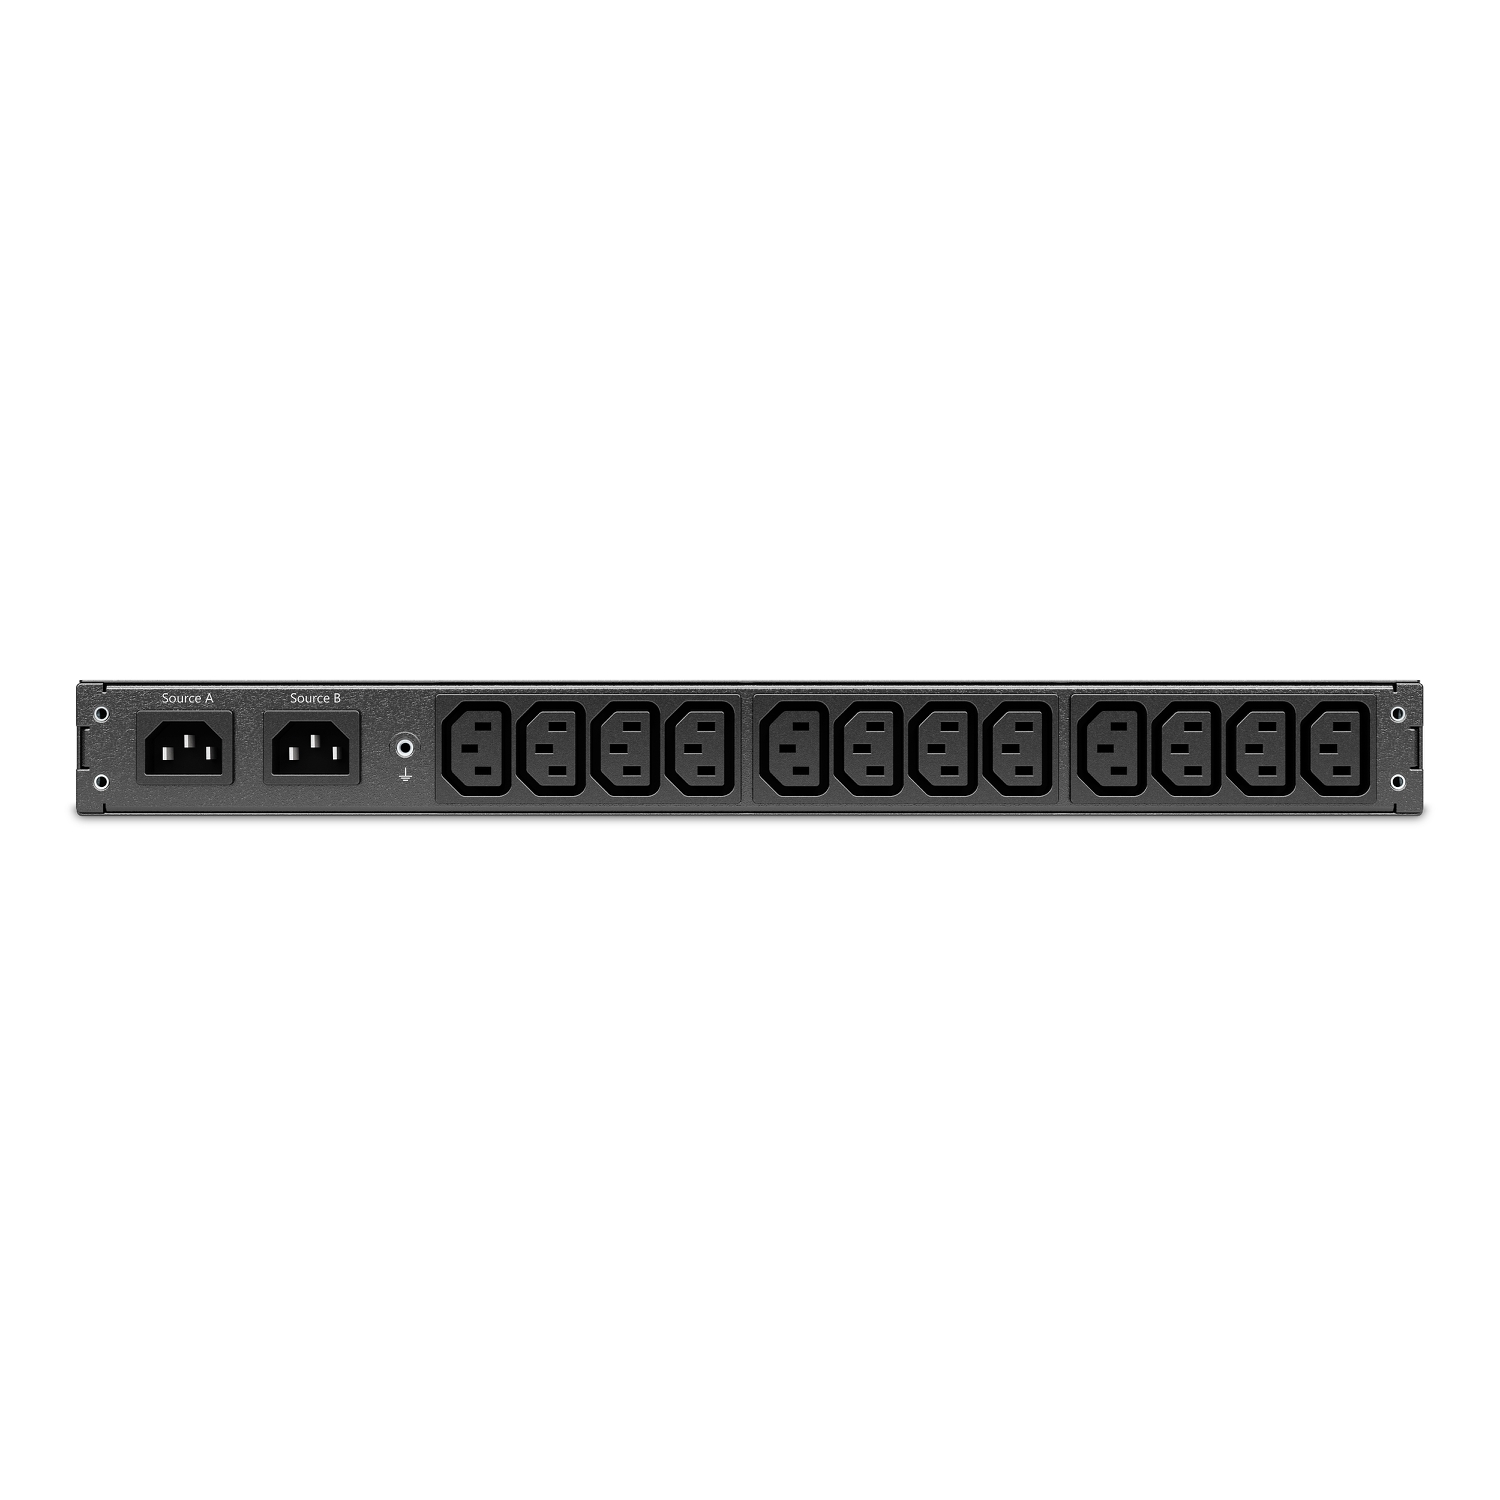 Rack ATS, 230V, 10A, C14 in, (12) C13 out 